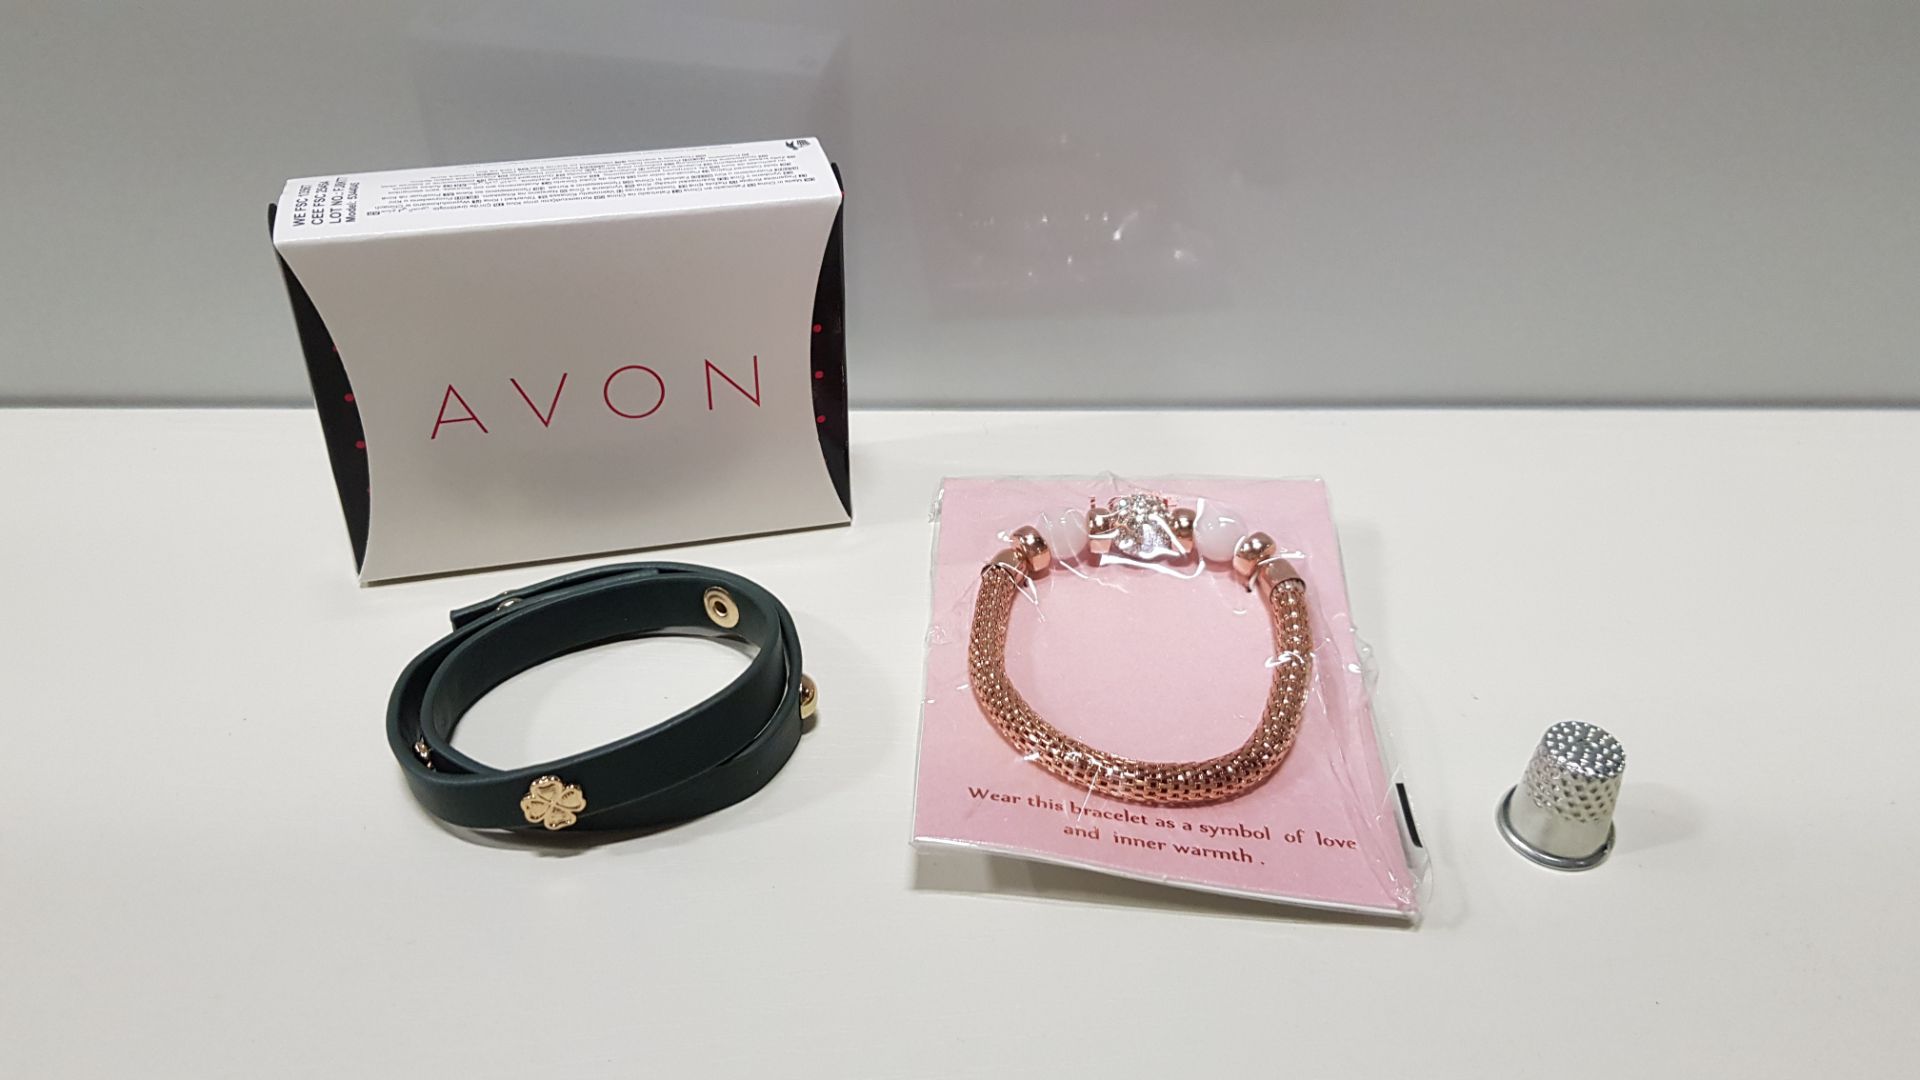 TRAY CONTAINING 200+ BRAND NEW ASSORTED INDIVIDUALLY PACKAGED AVON KASANDRA ROSE-QUARTZ BRACELET AND